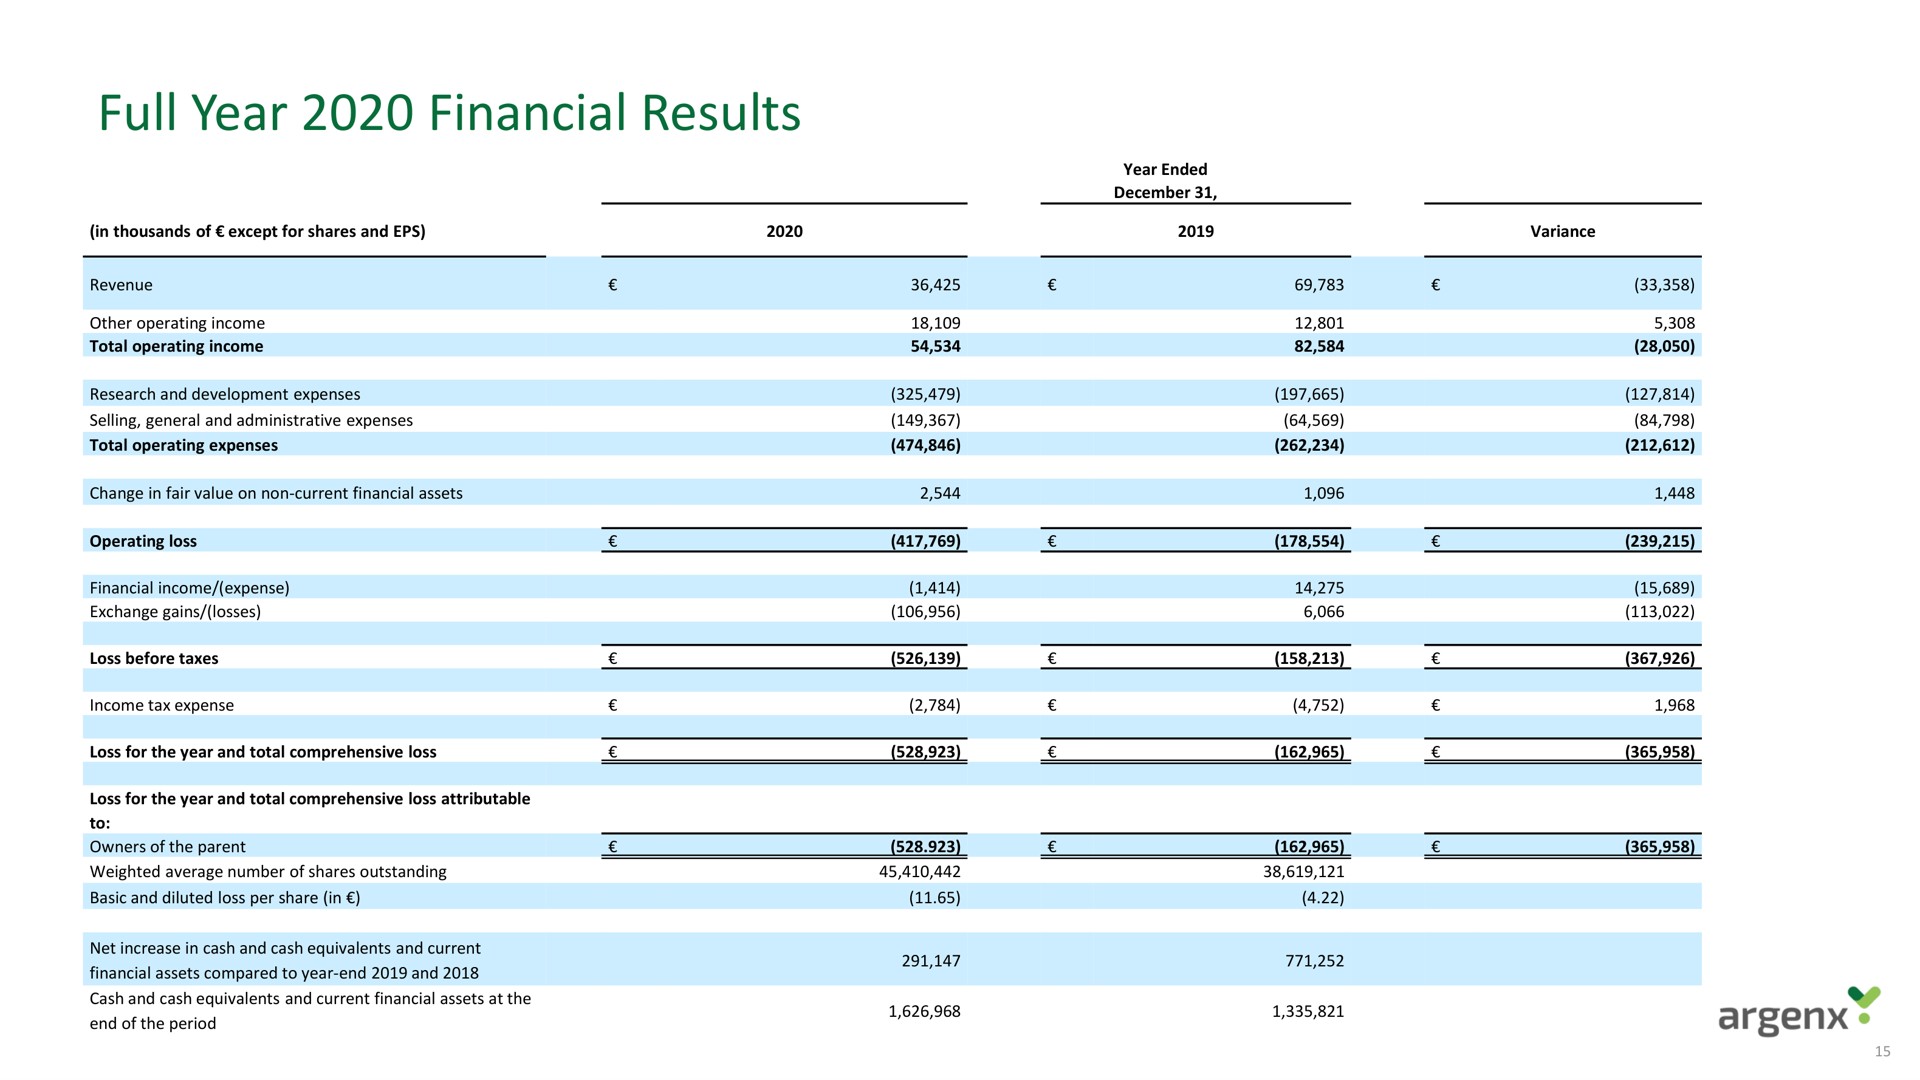 full year financial results | argenx SE